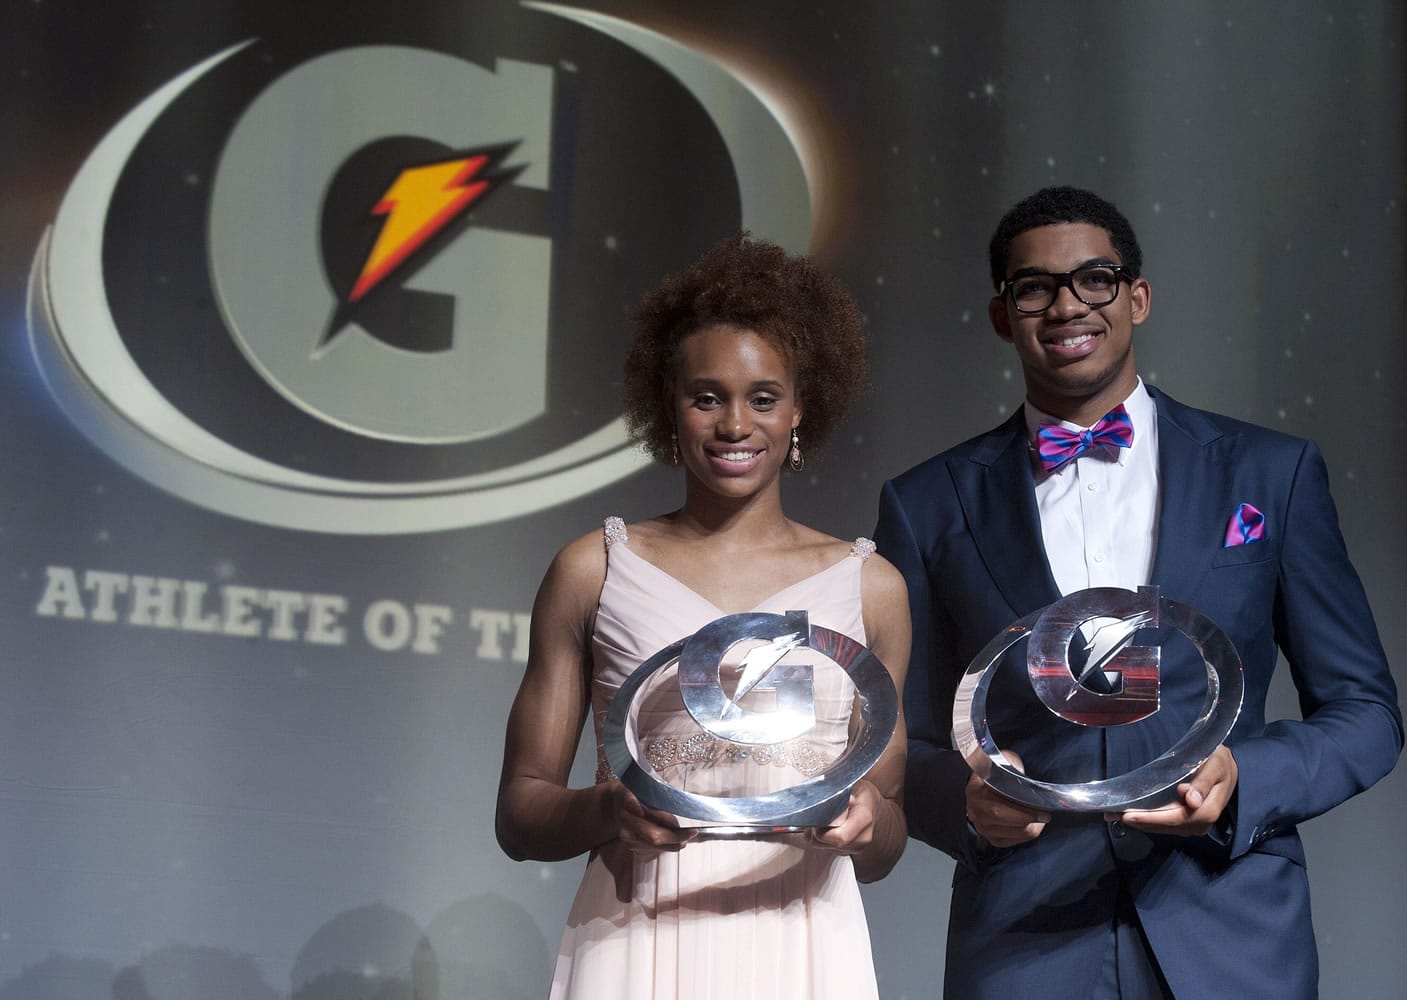 Photo courtesy of Gatorade
Karl Towns Jr., right, and Brianna Turner were named the Gatorade National High School Athletes of the Year. Towns, from Metuchen, N.J., is headed to Kentucky to play basketball. Turner, from Manvel, Texas, is headed to Notre Dame to play basketball this fall.